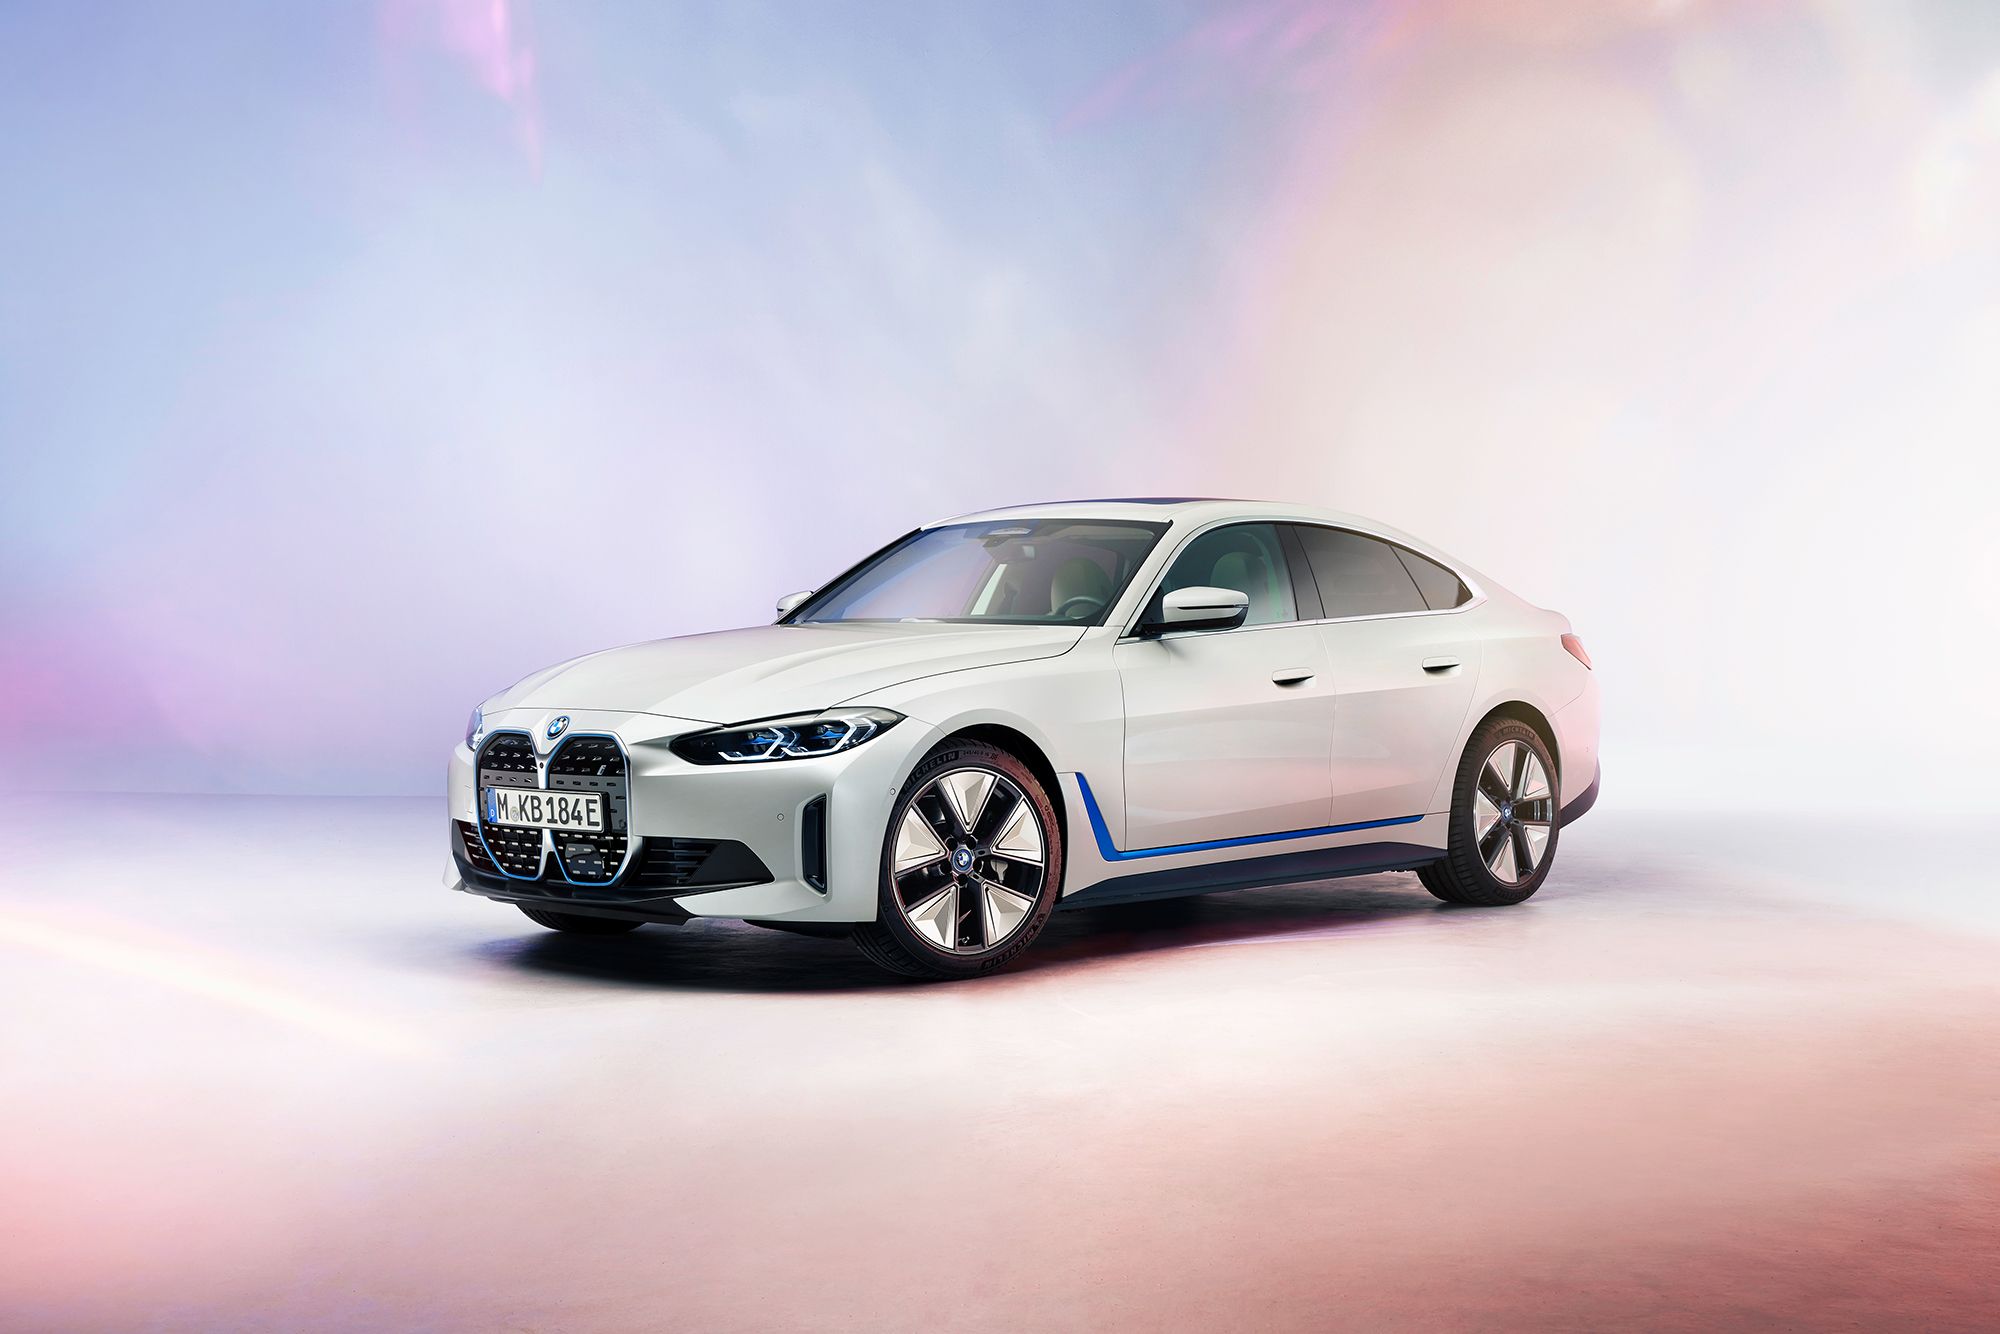 BMW Teases the Electric I4 Concept, a Sleek and Powerful Tesla Rival